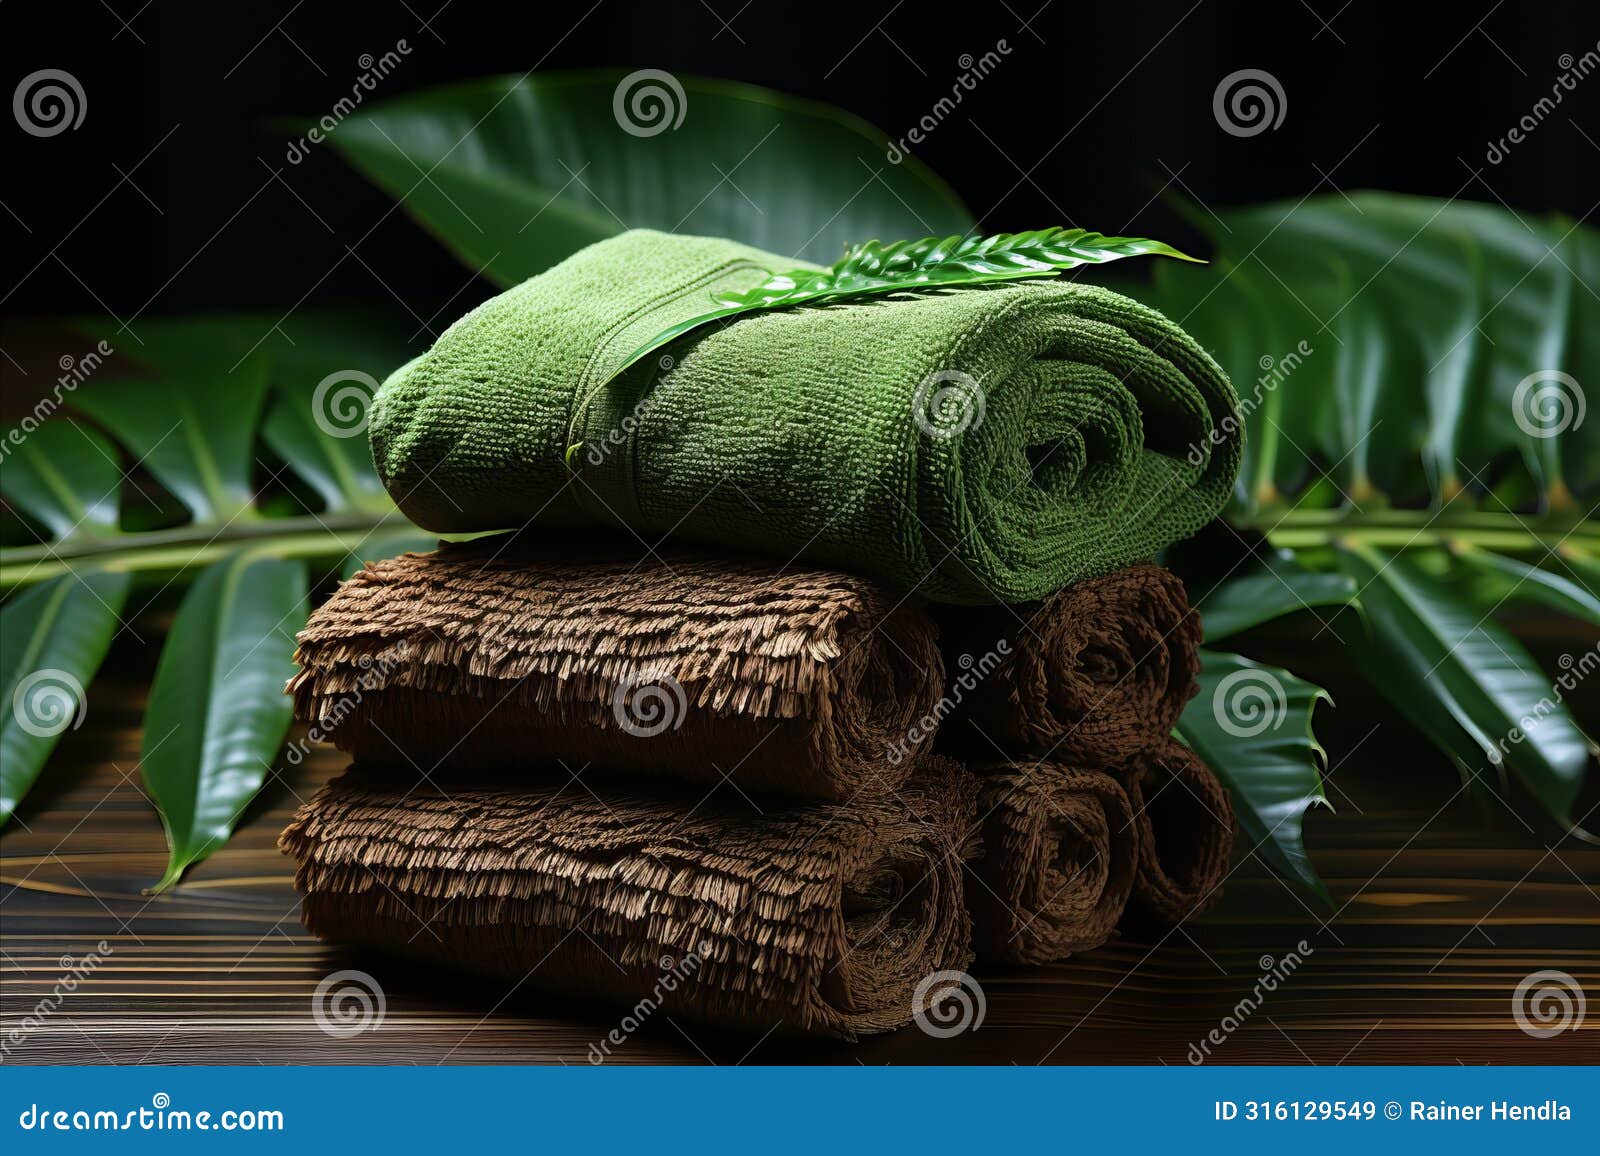 sauna towels, spa items, aromatherapy comfort and natural scents for relaxation